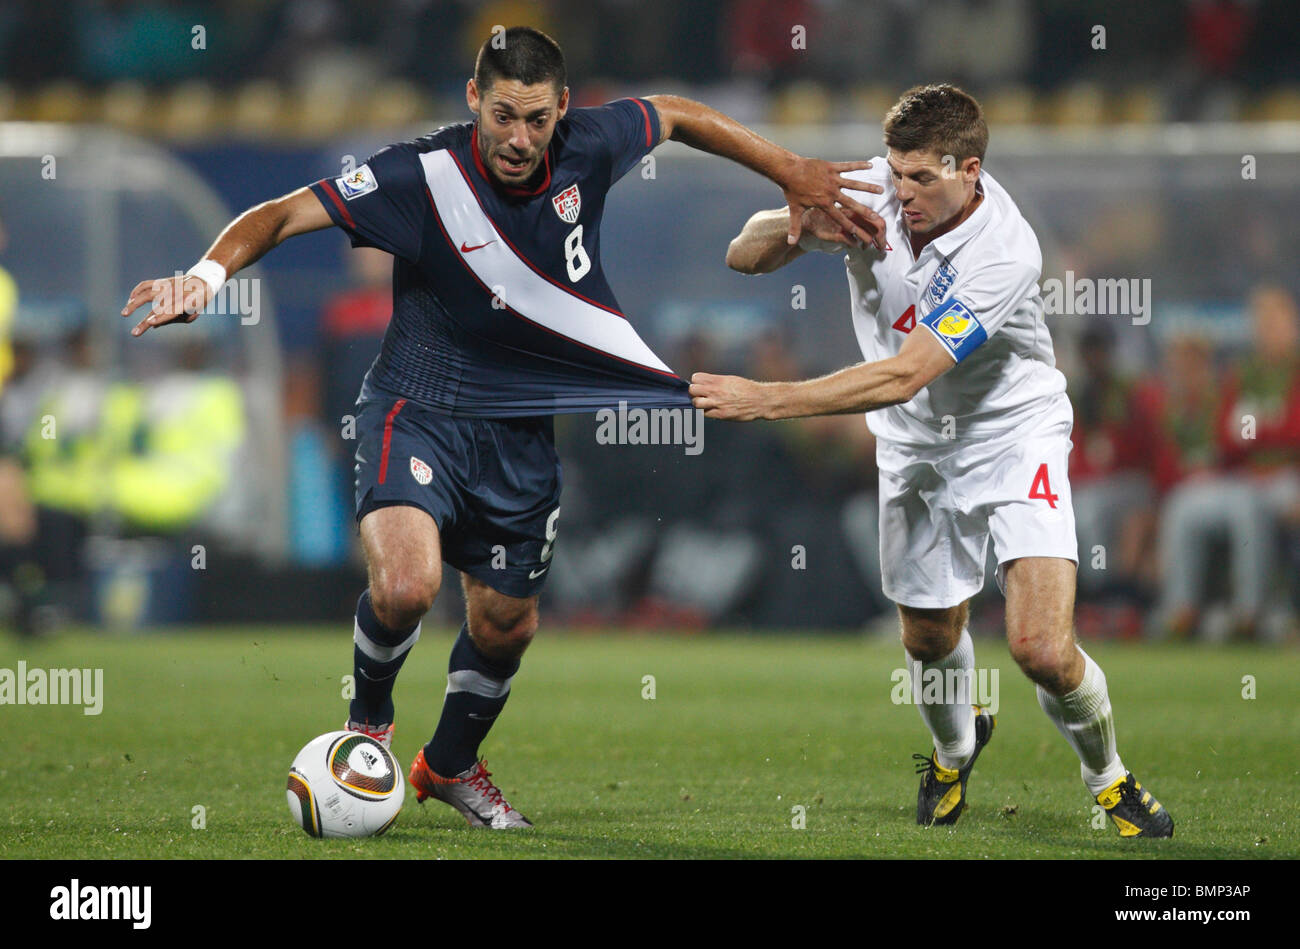 England team captain Steven Gerrard (4) tries to contain Clint Dempsey of the United States (8) during a 2010 World Cup match. Stock Photo